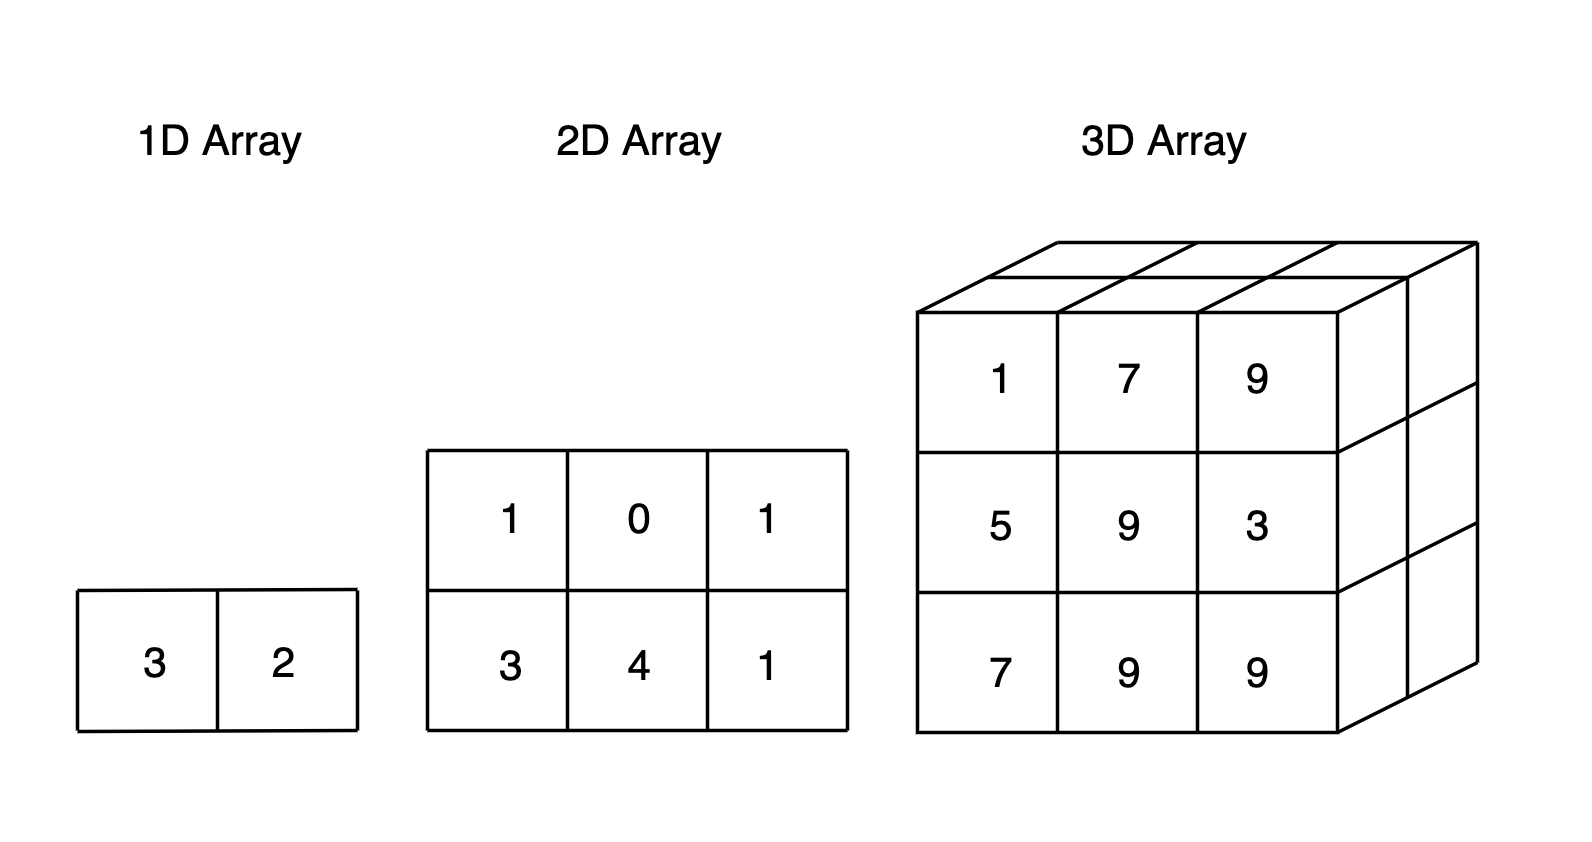 What is a 3D array?